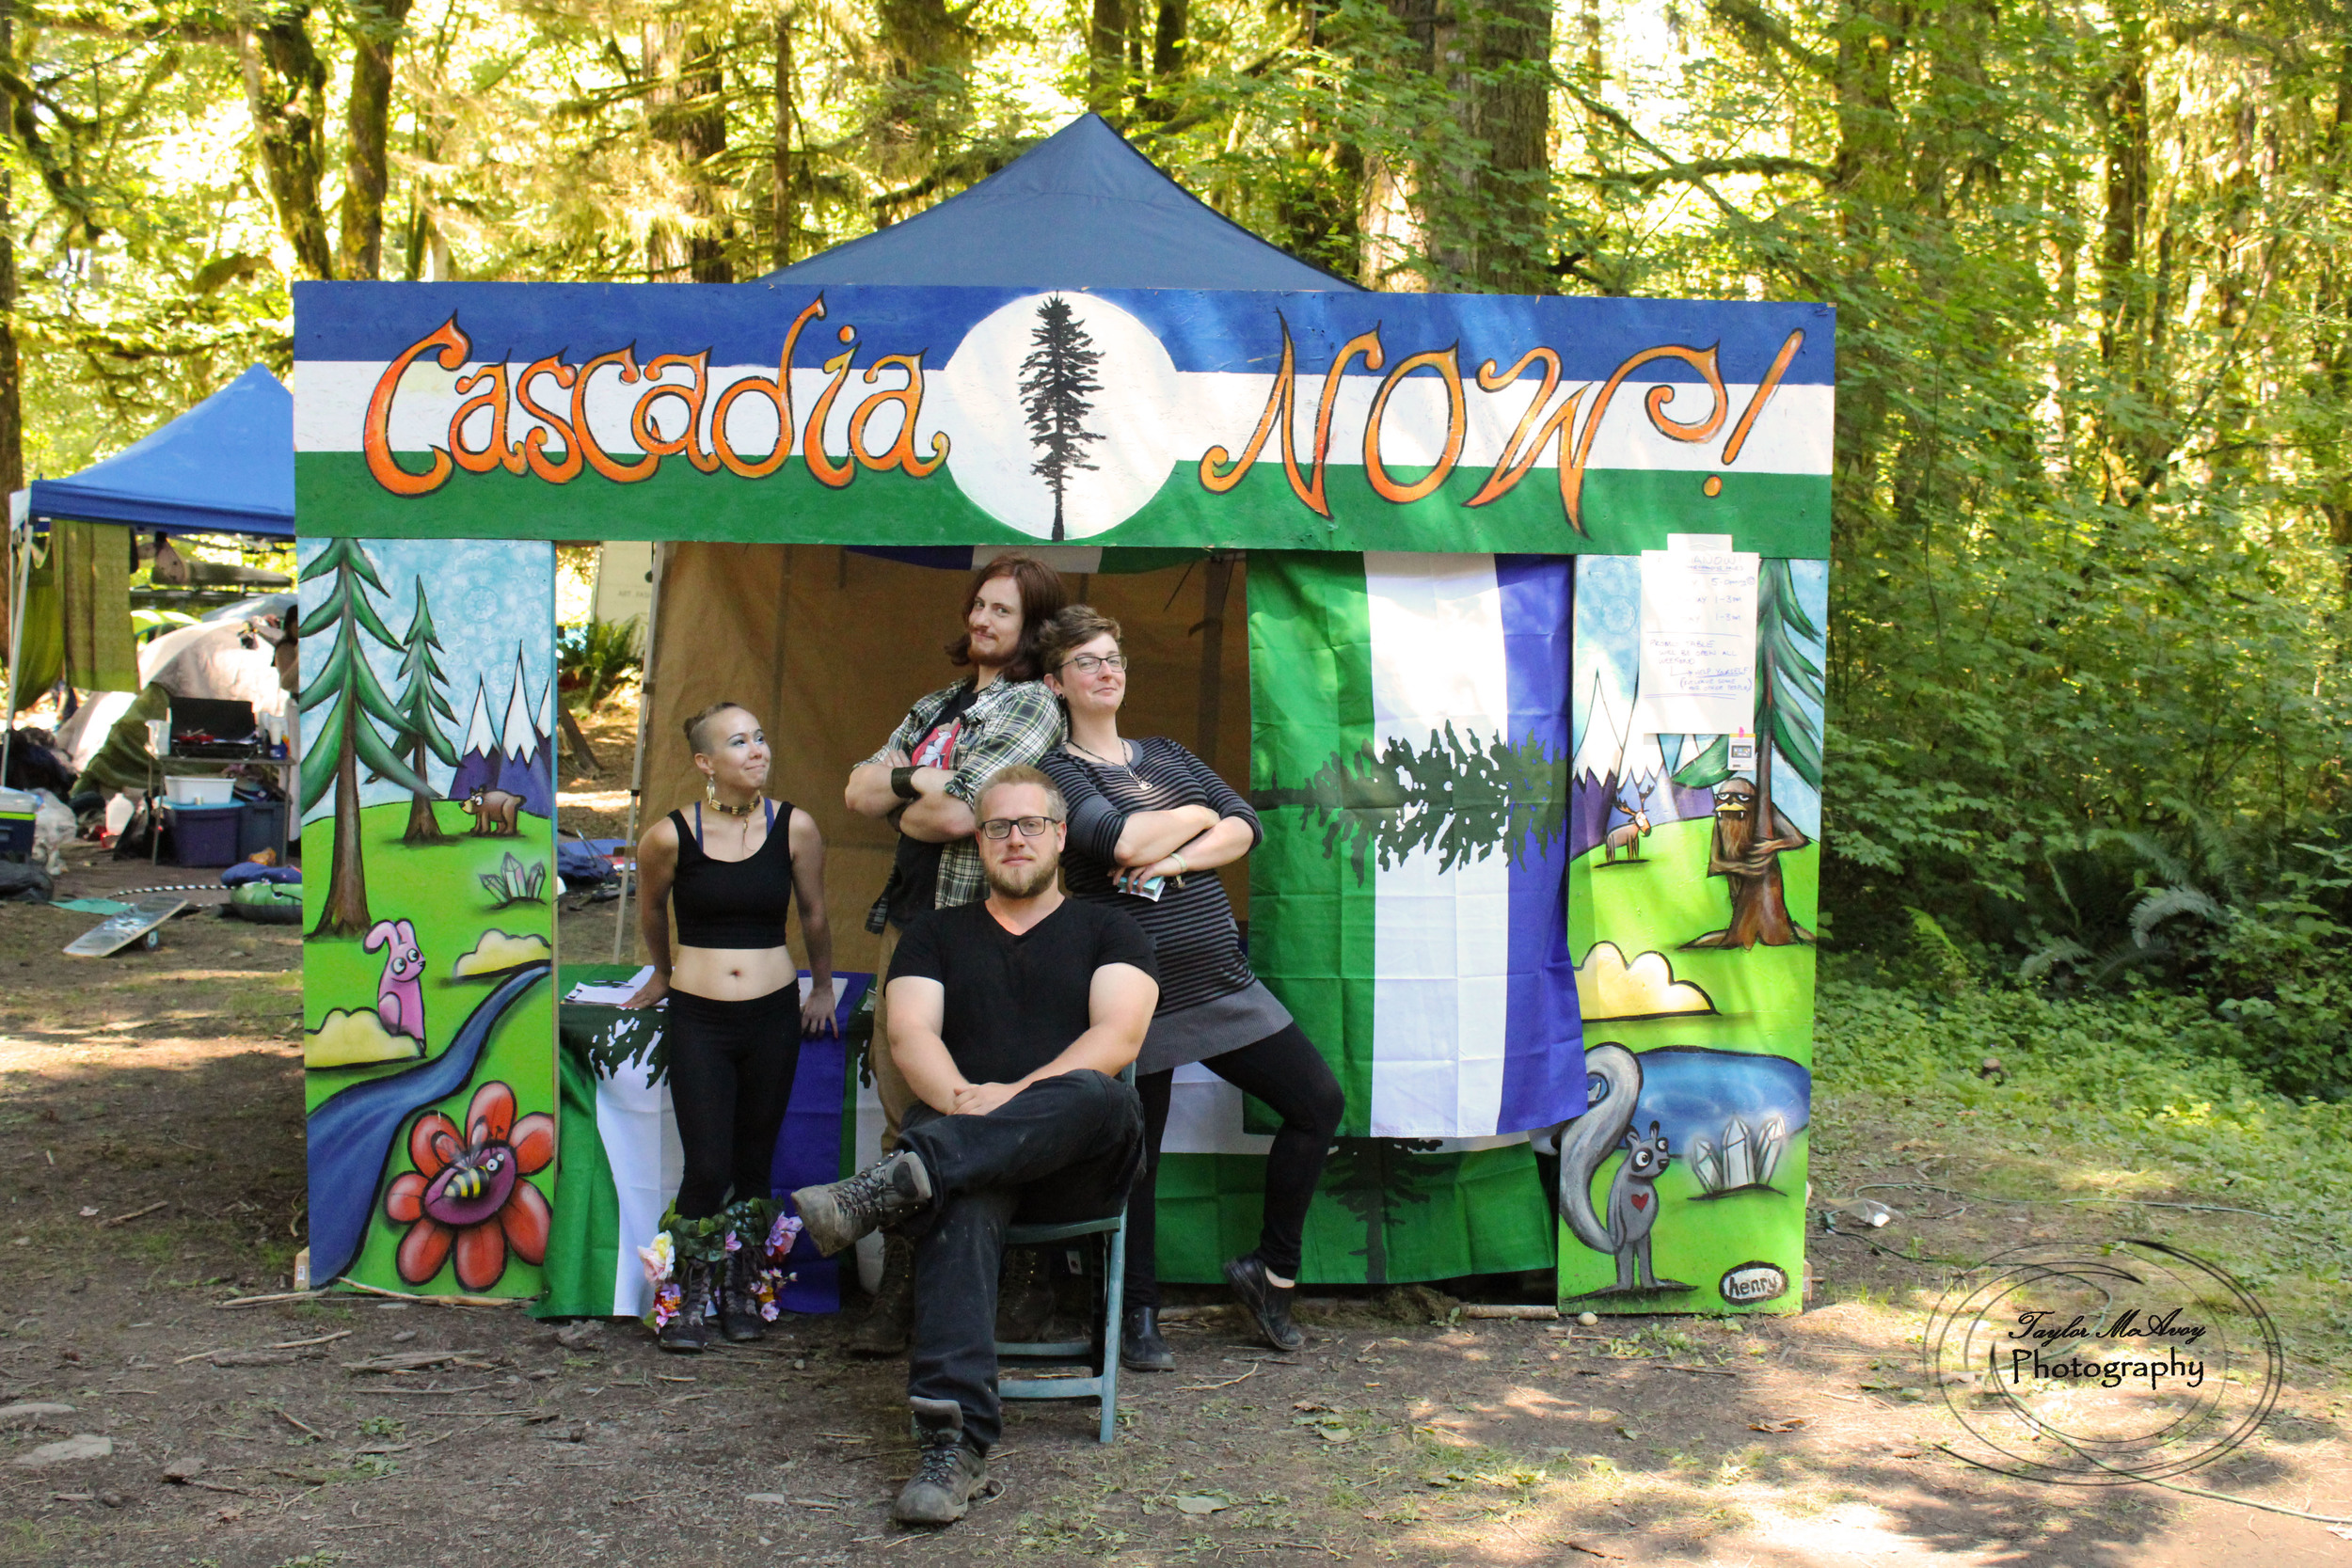  The CascadiaNow! squad posed in front of our booth painted by Seattle artist Ryan Henry Ward. 